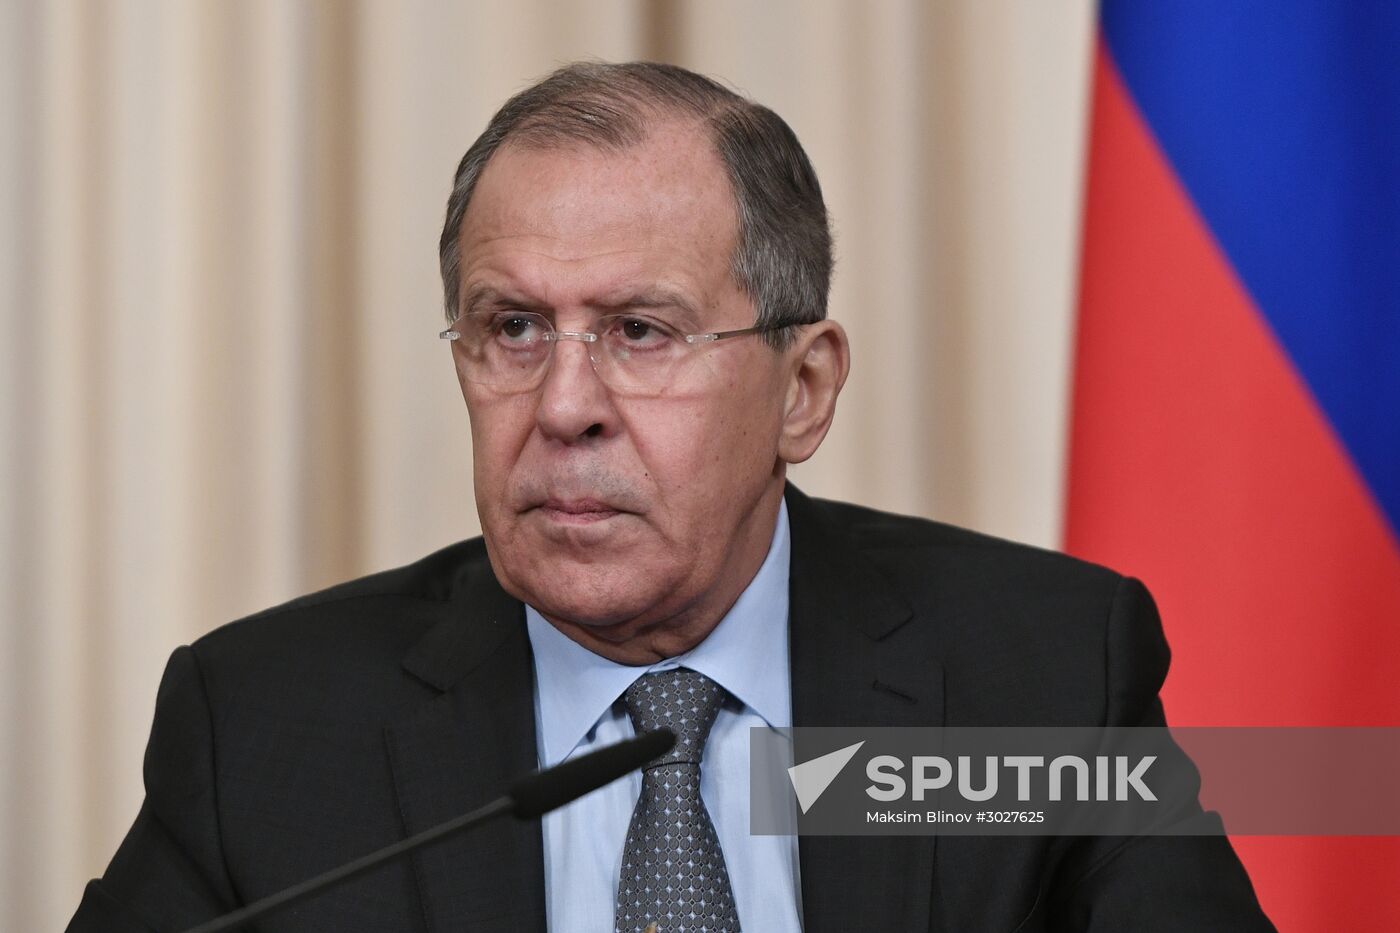 Russian Foreign Minister Sergei Lavrov meets with his Mongolian counterpart Tsend Munkh-Orgil